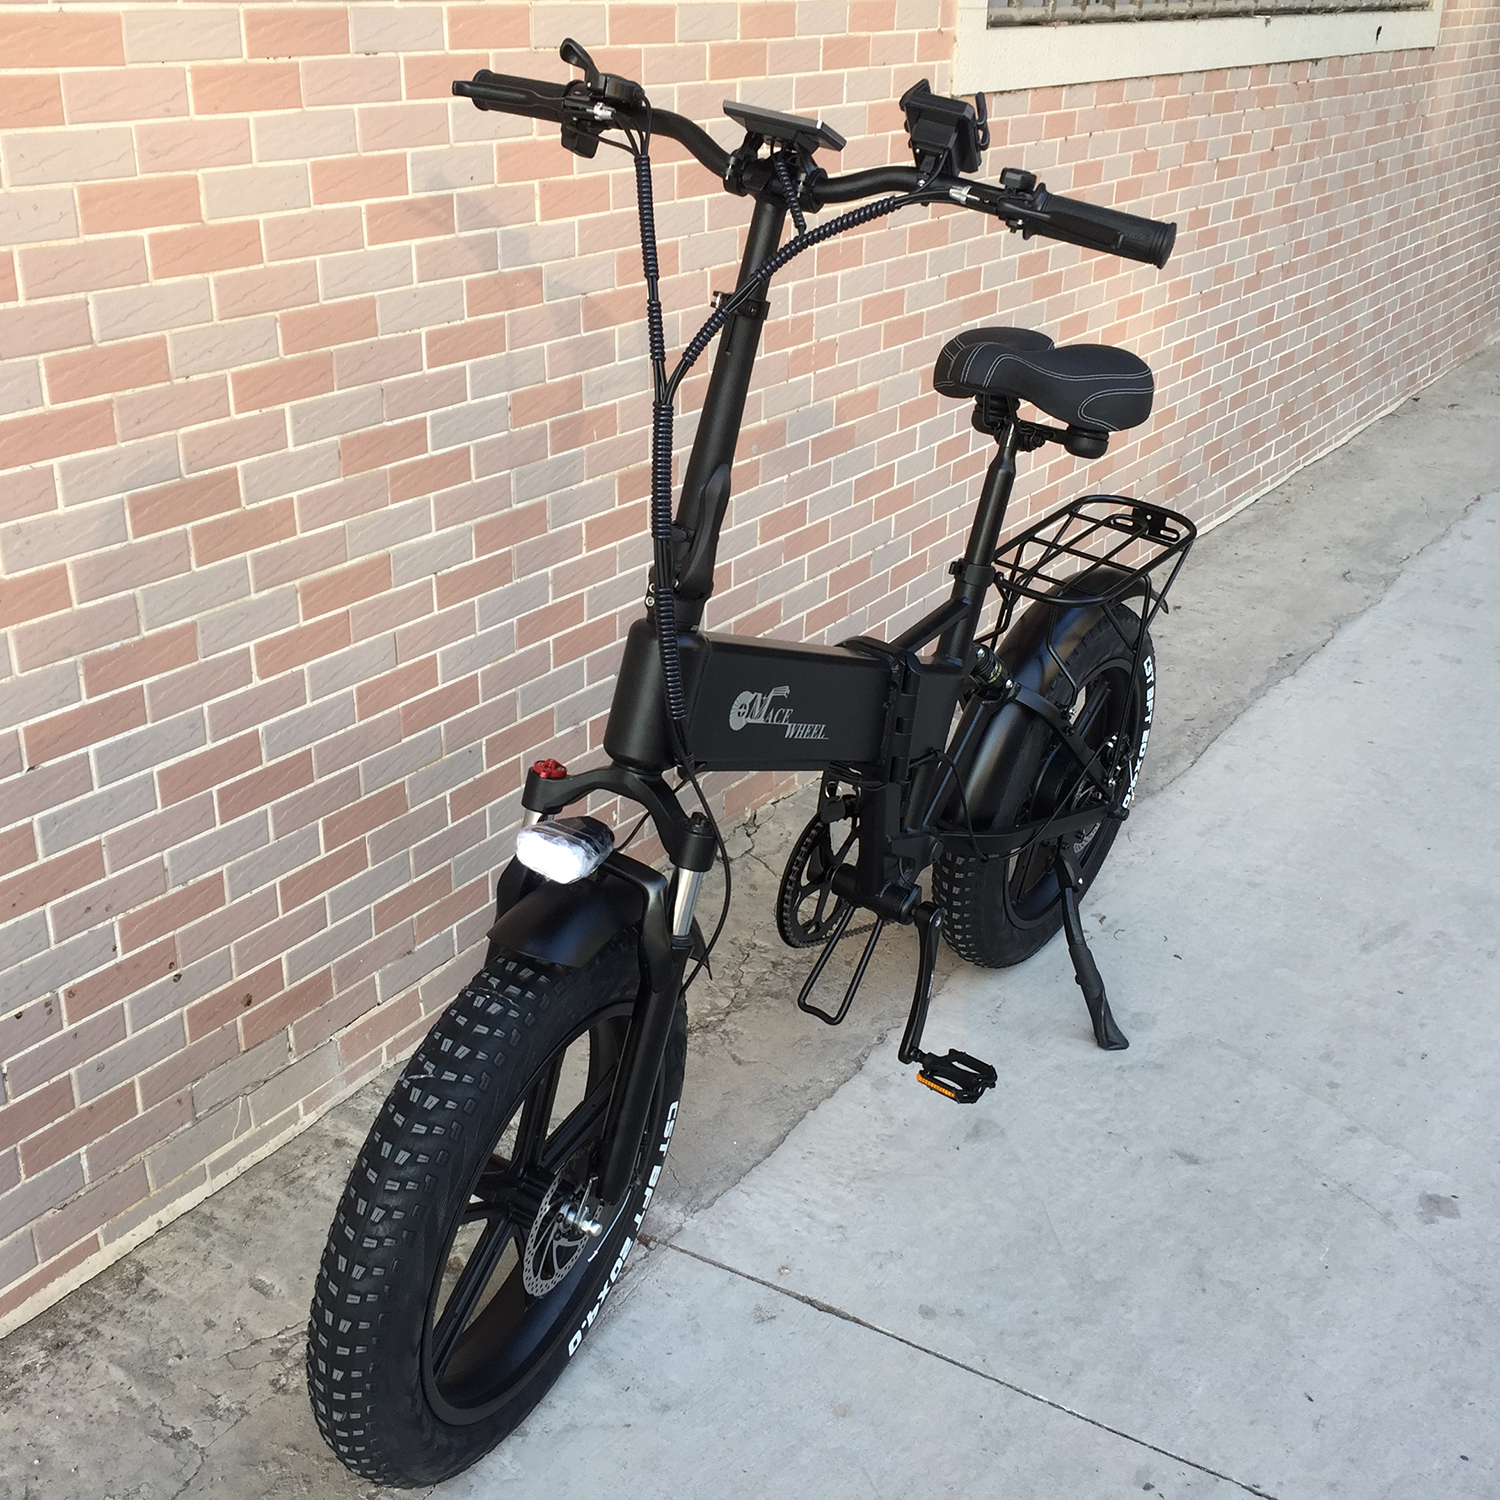 Find EU DIRECT CMACEWHEEL RX20 One Wheel 15Ah 48V 750W 20in Folding Electric Bike City E Bike for Sale on Gipsybee.com with cryptocurrencies